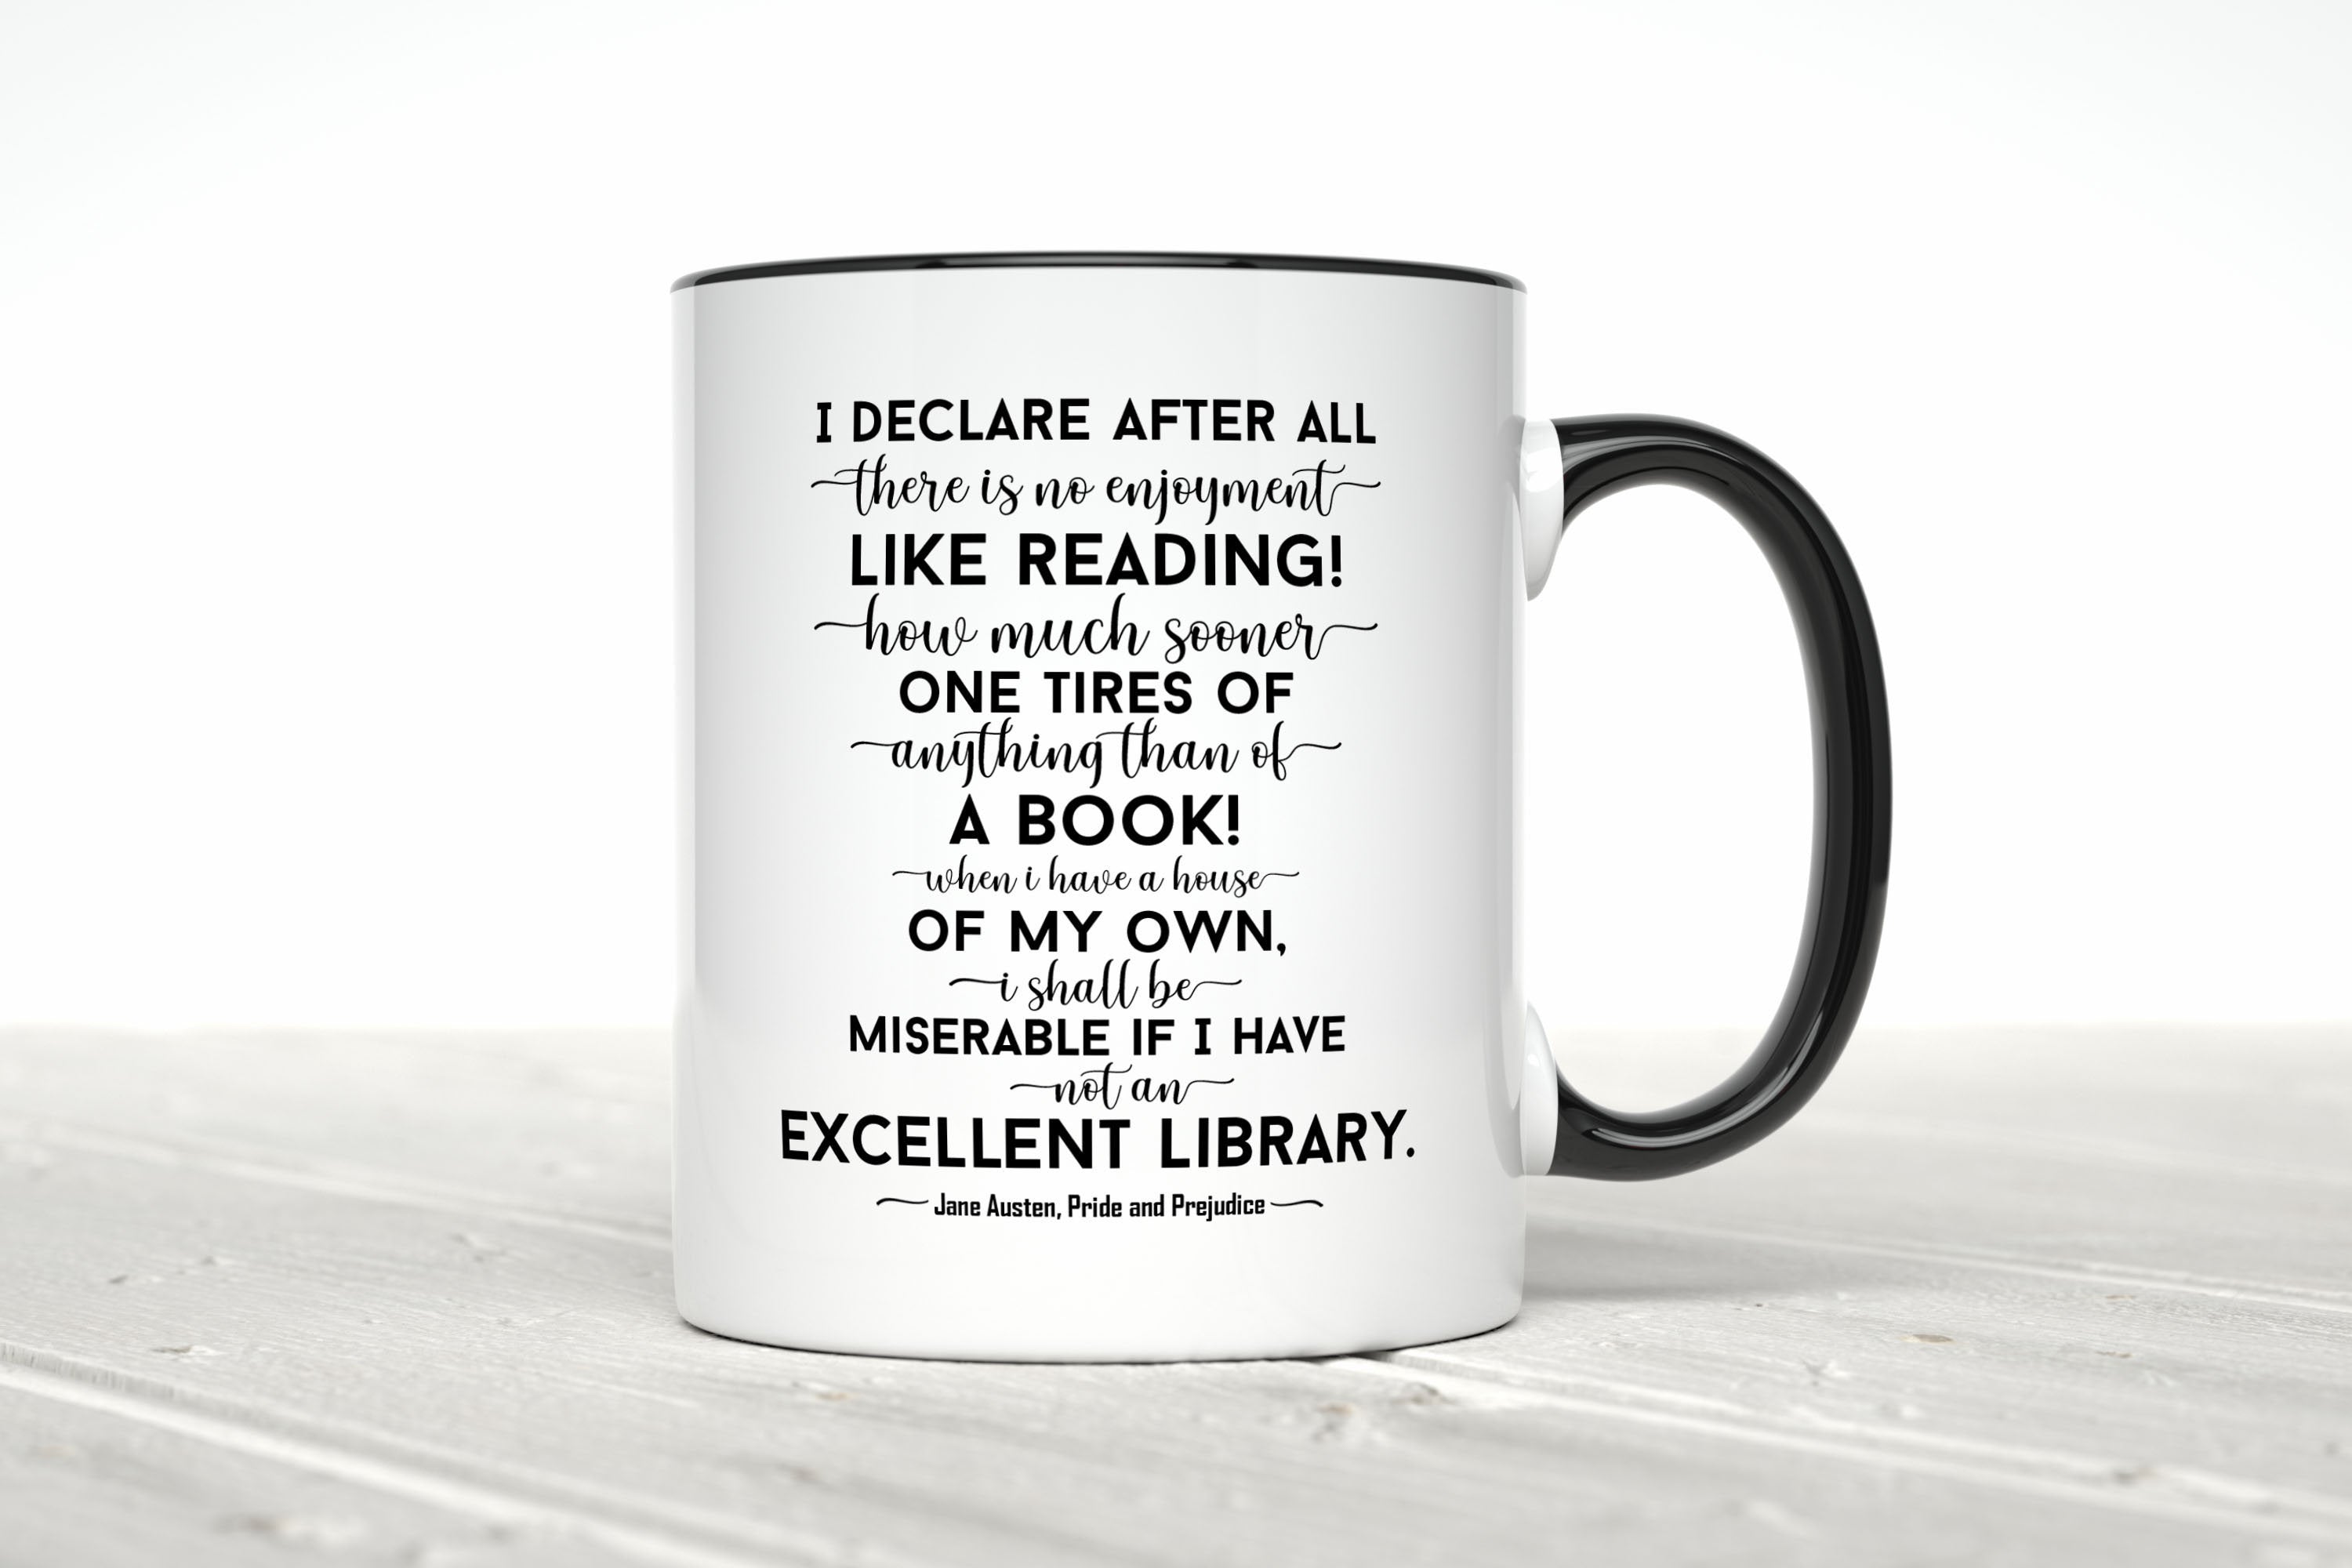 Jane Austen Quote Tea or Coffee Mug Gift, Black and White Pride & Prejudice I Declare After All There Is No Enjoyment Like Reading!